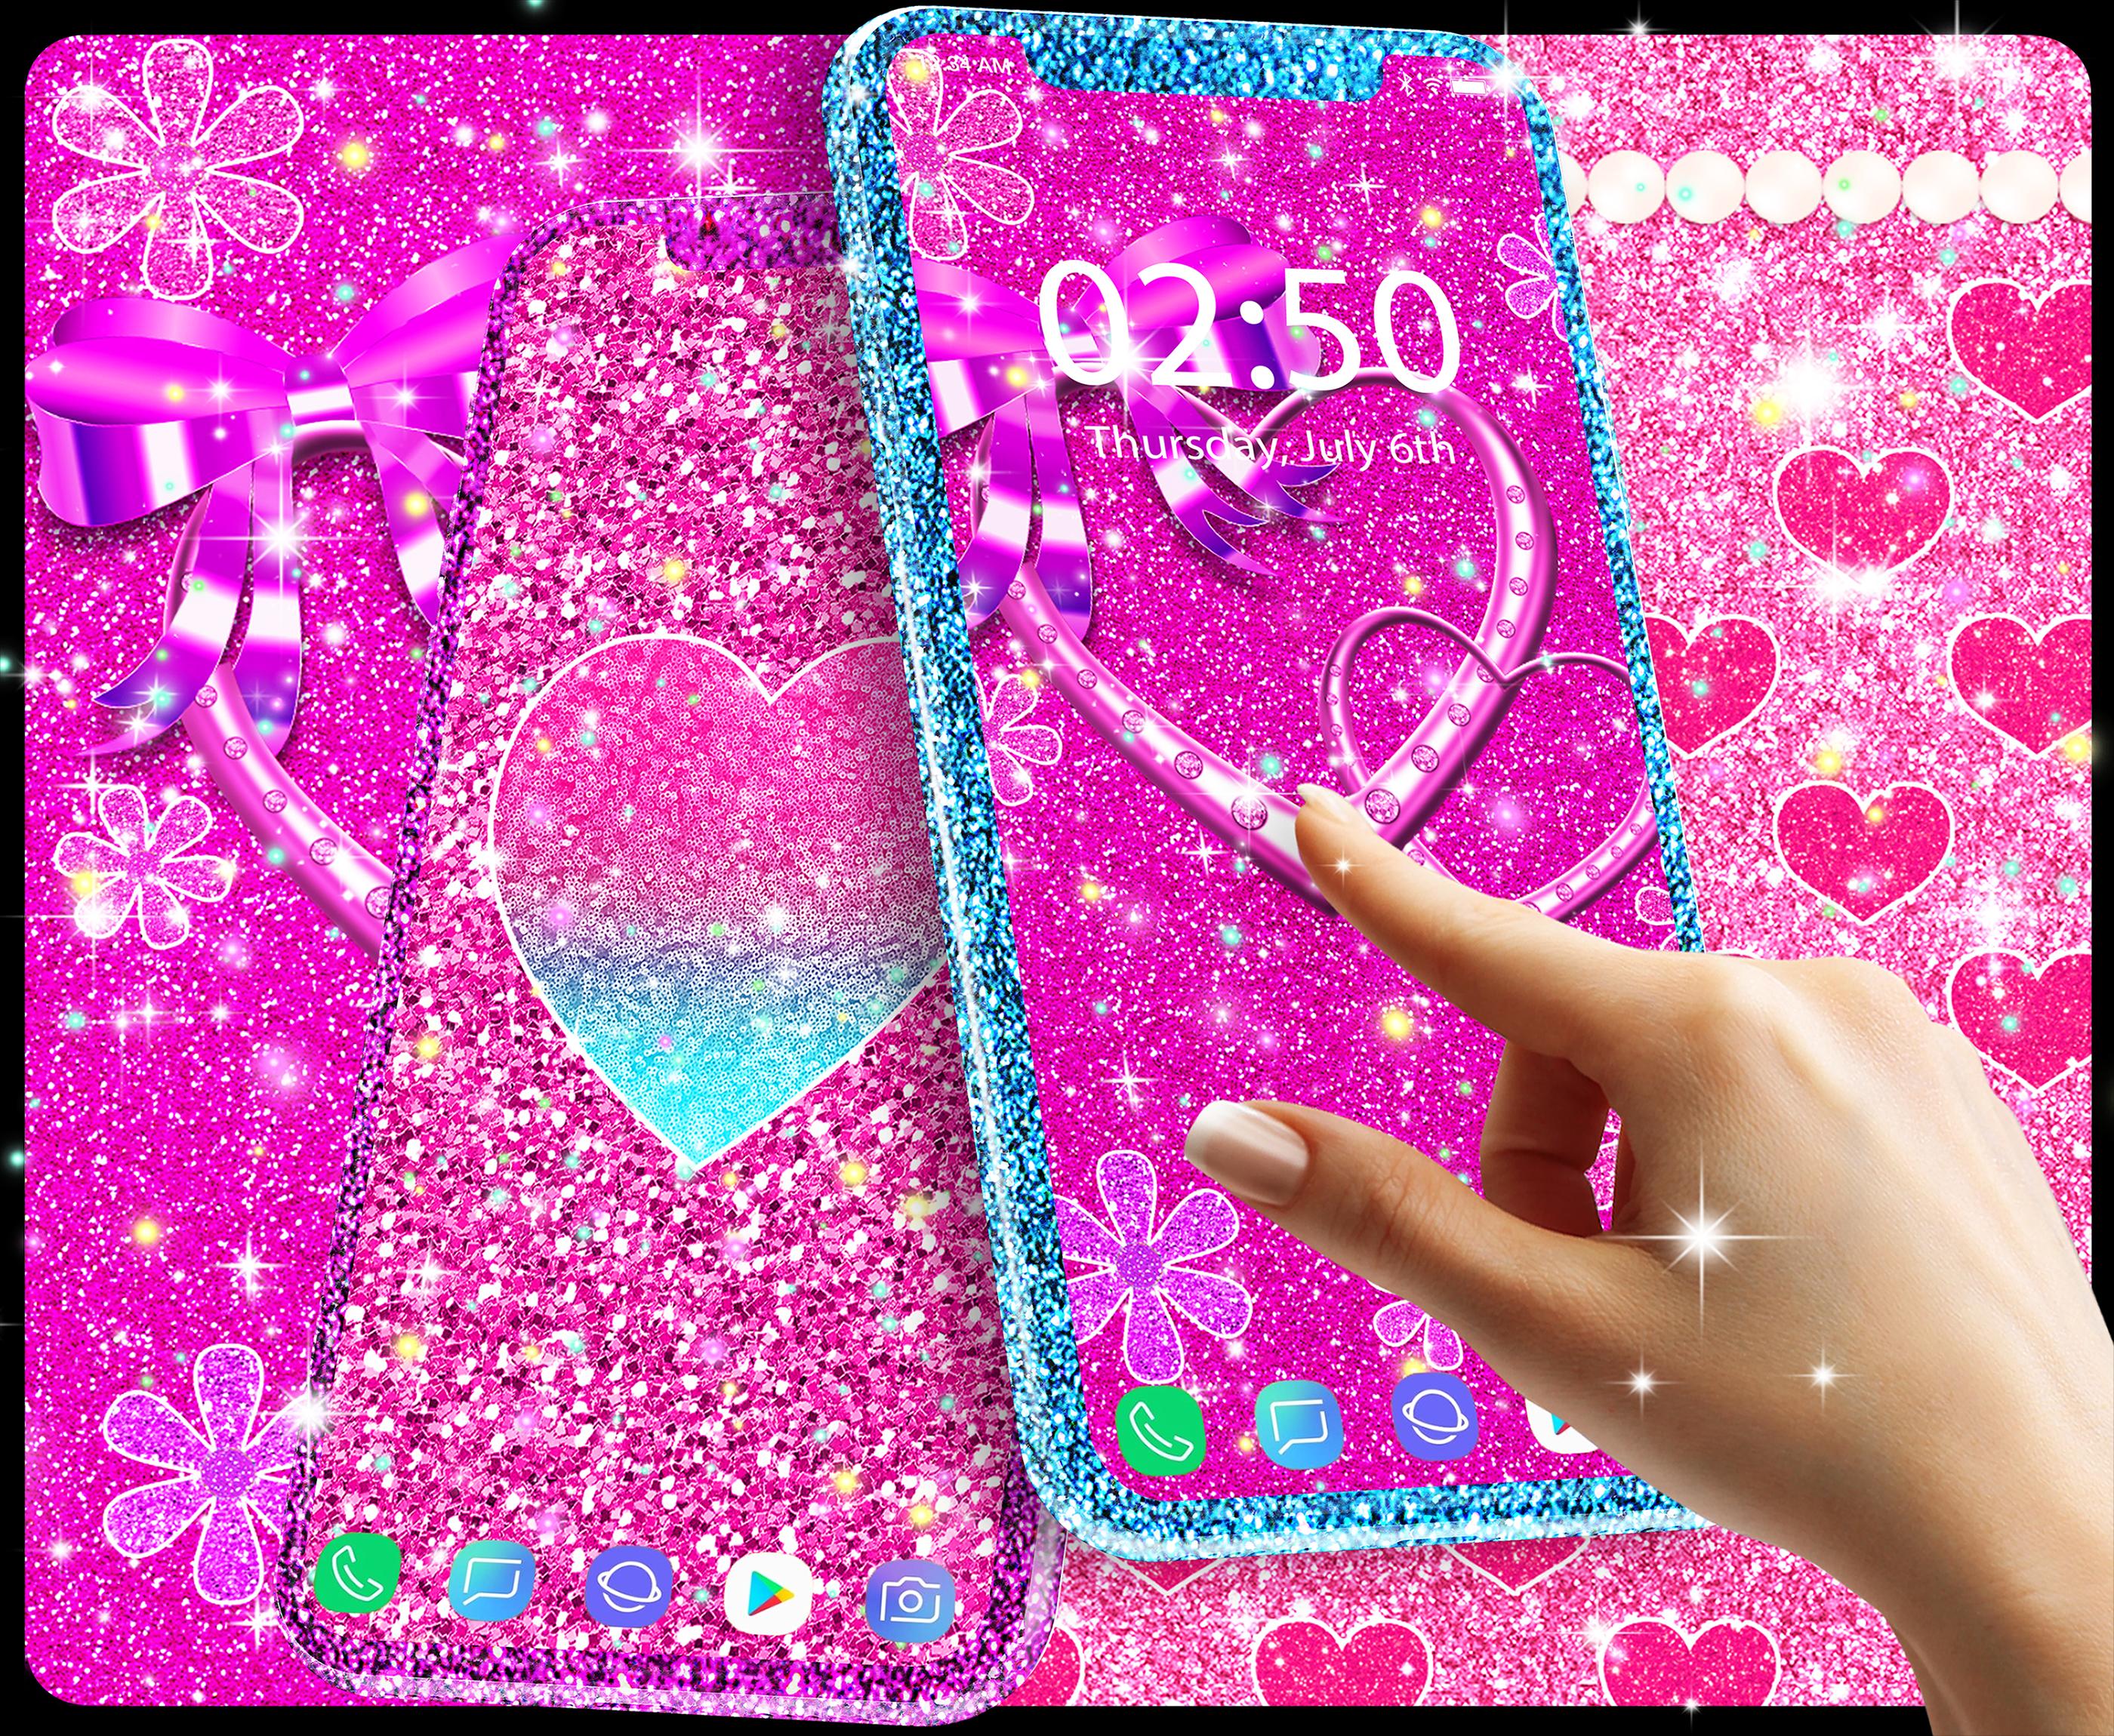 Featured image of post Hintergrundbilder Pink Glitzer Pink glitter hintergrund pinker hintergrund glitzer hintergrundbilder rosa hintergrundbild iphone download premium vector of pink and blue glittery pattern background vector high resolution